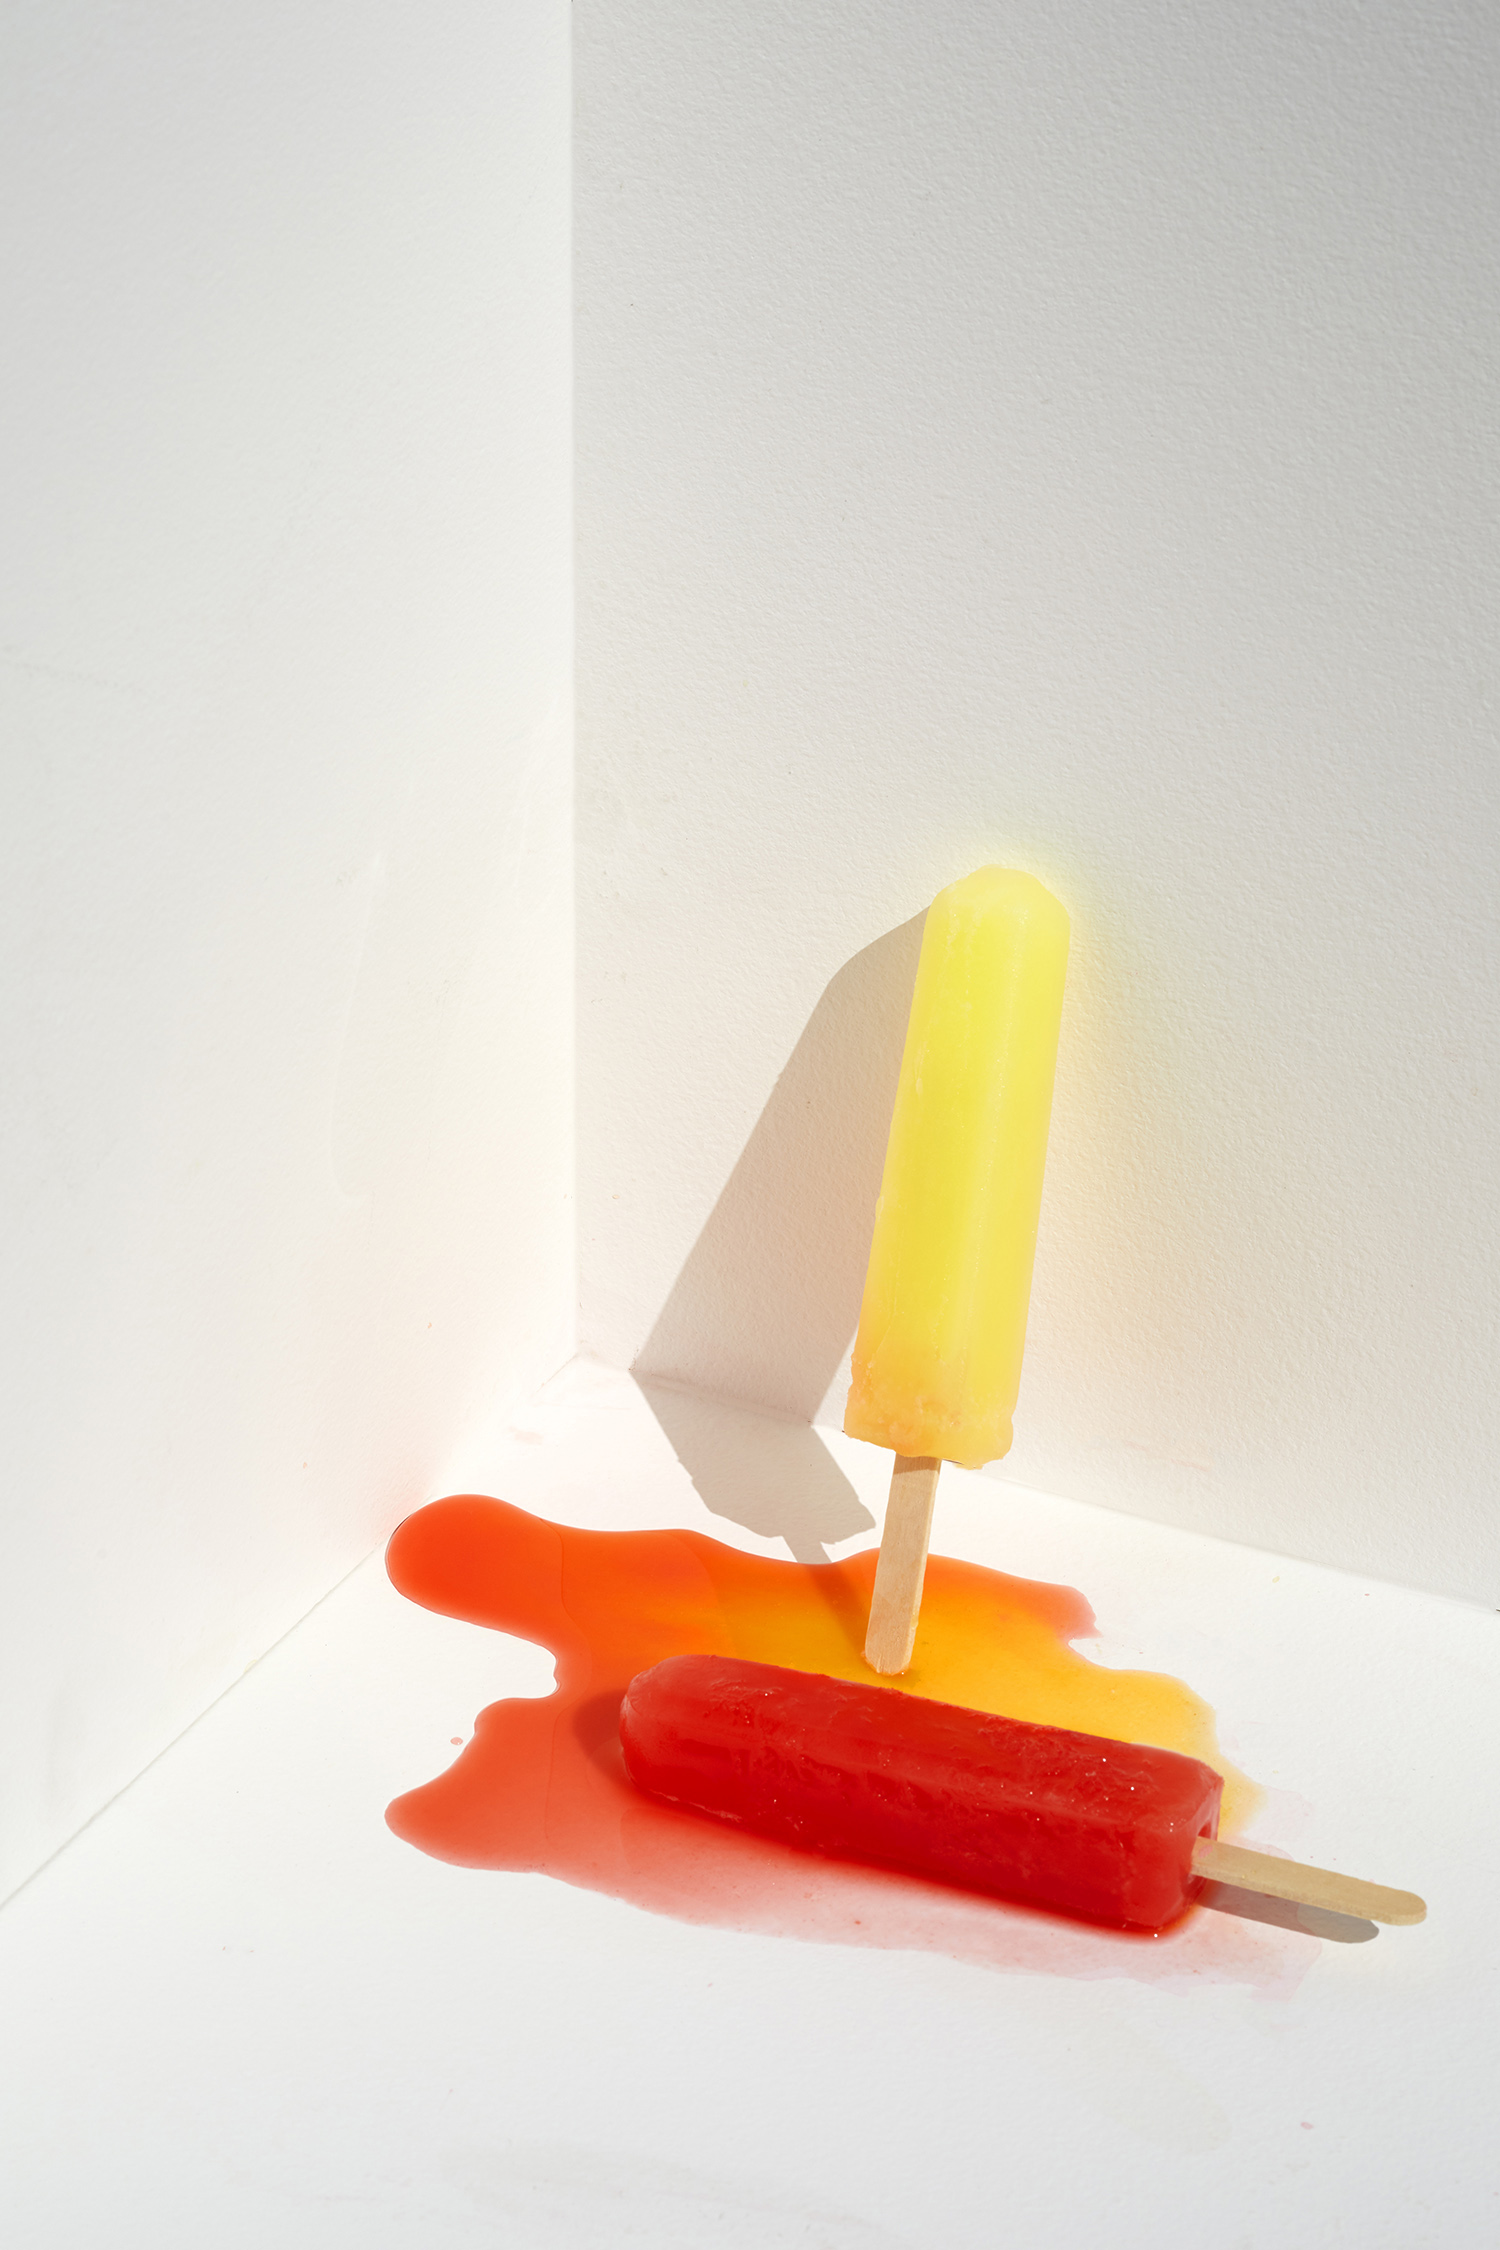 Popsicle melting still life on a hot summer day